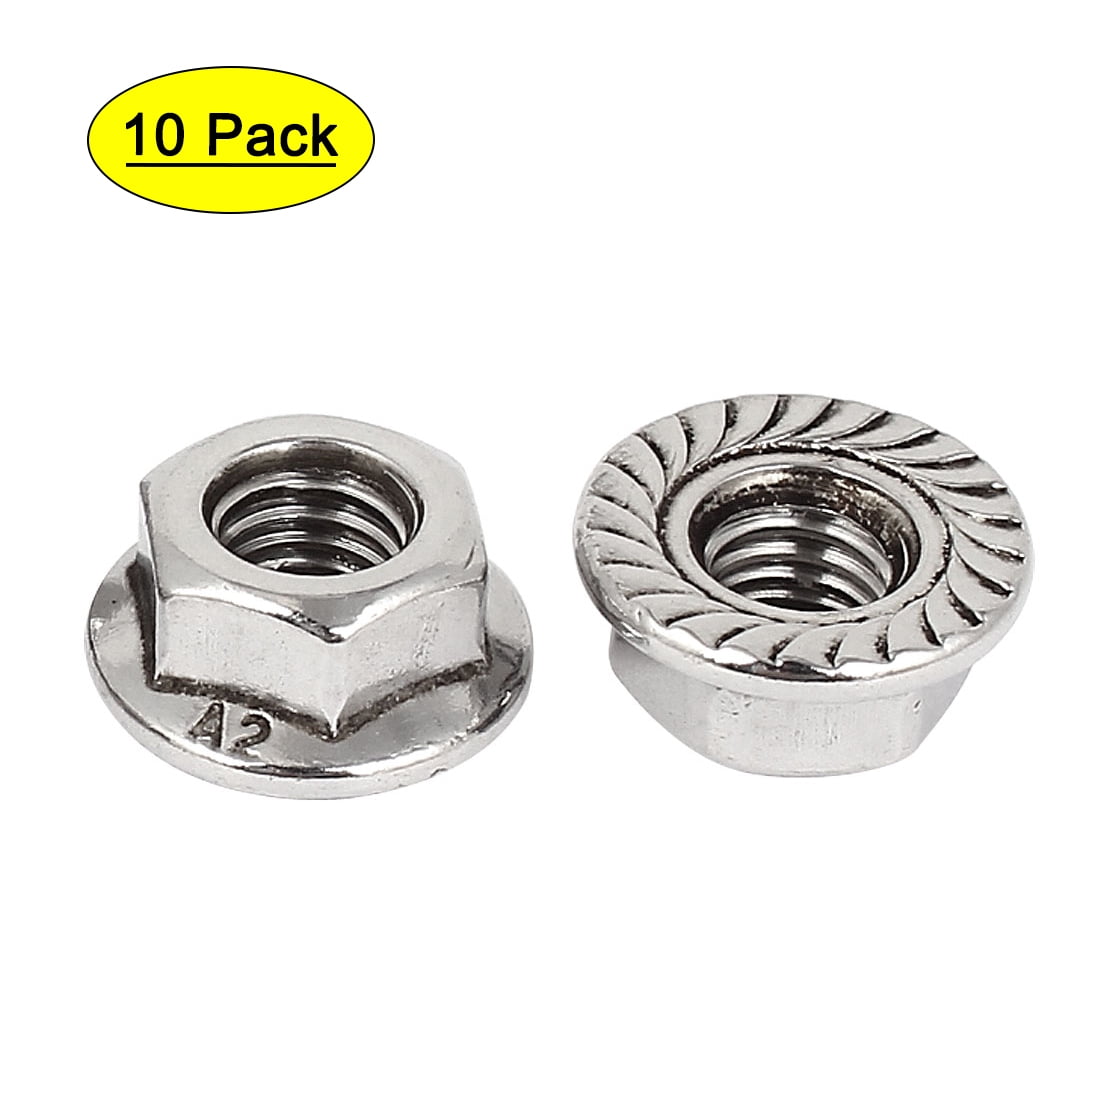 3/8-24 Serrated Flange Lock Nuts/Spin Whiz Nut Zinc Plated 3/8x24 Fine 200 